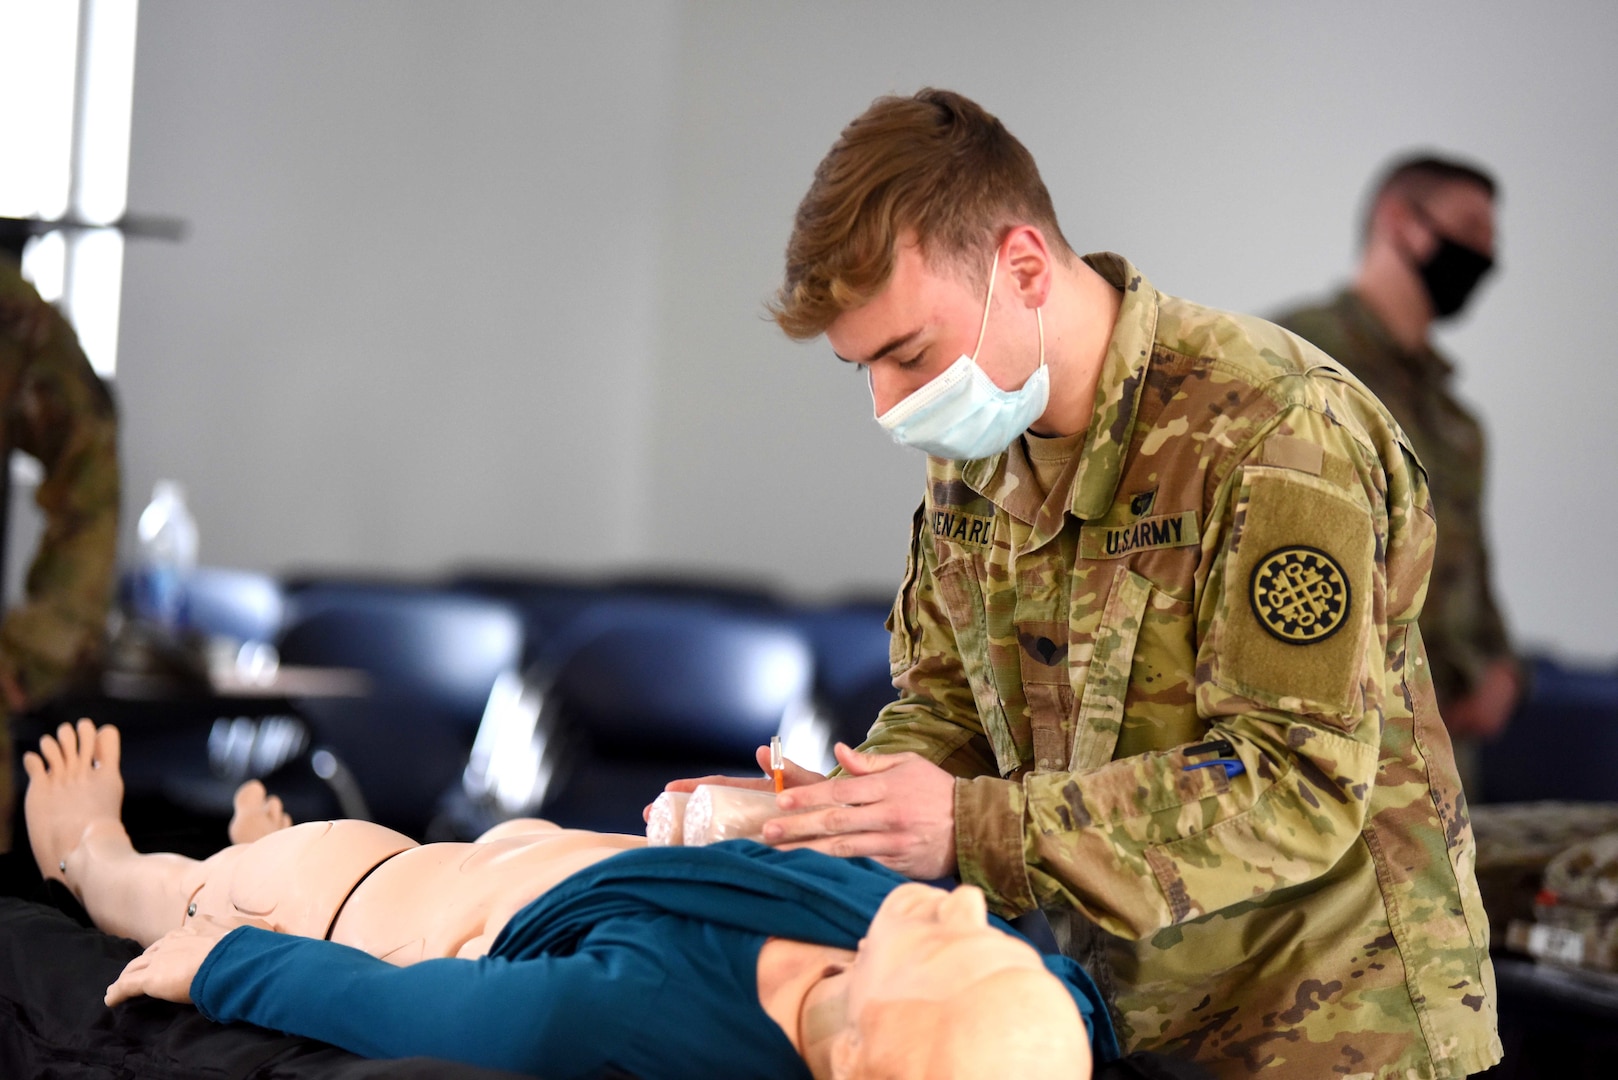 Medics with the Michigan Army National Guard attend a National Registry of Emergency Medical Technicians (NREMT) certification course, Fort Custer Training Center, Augusta, Mich., Jan 27, 2021. These medical professionals are required to complete sustainment training every 24 months.